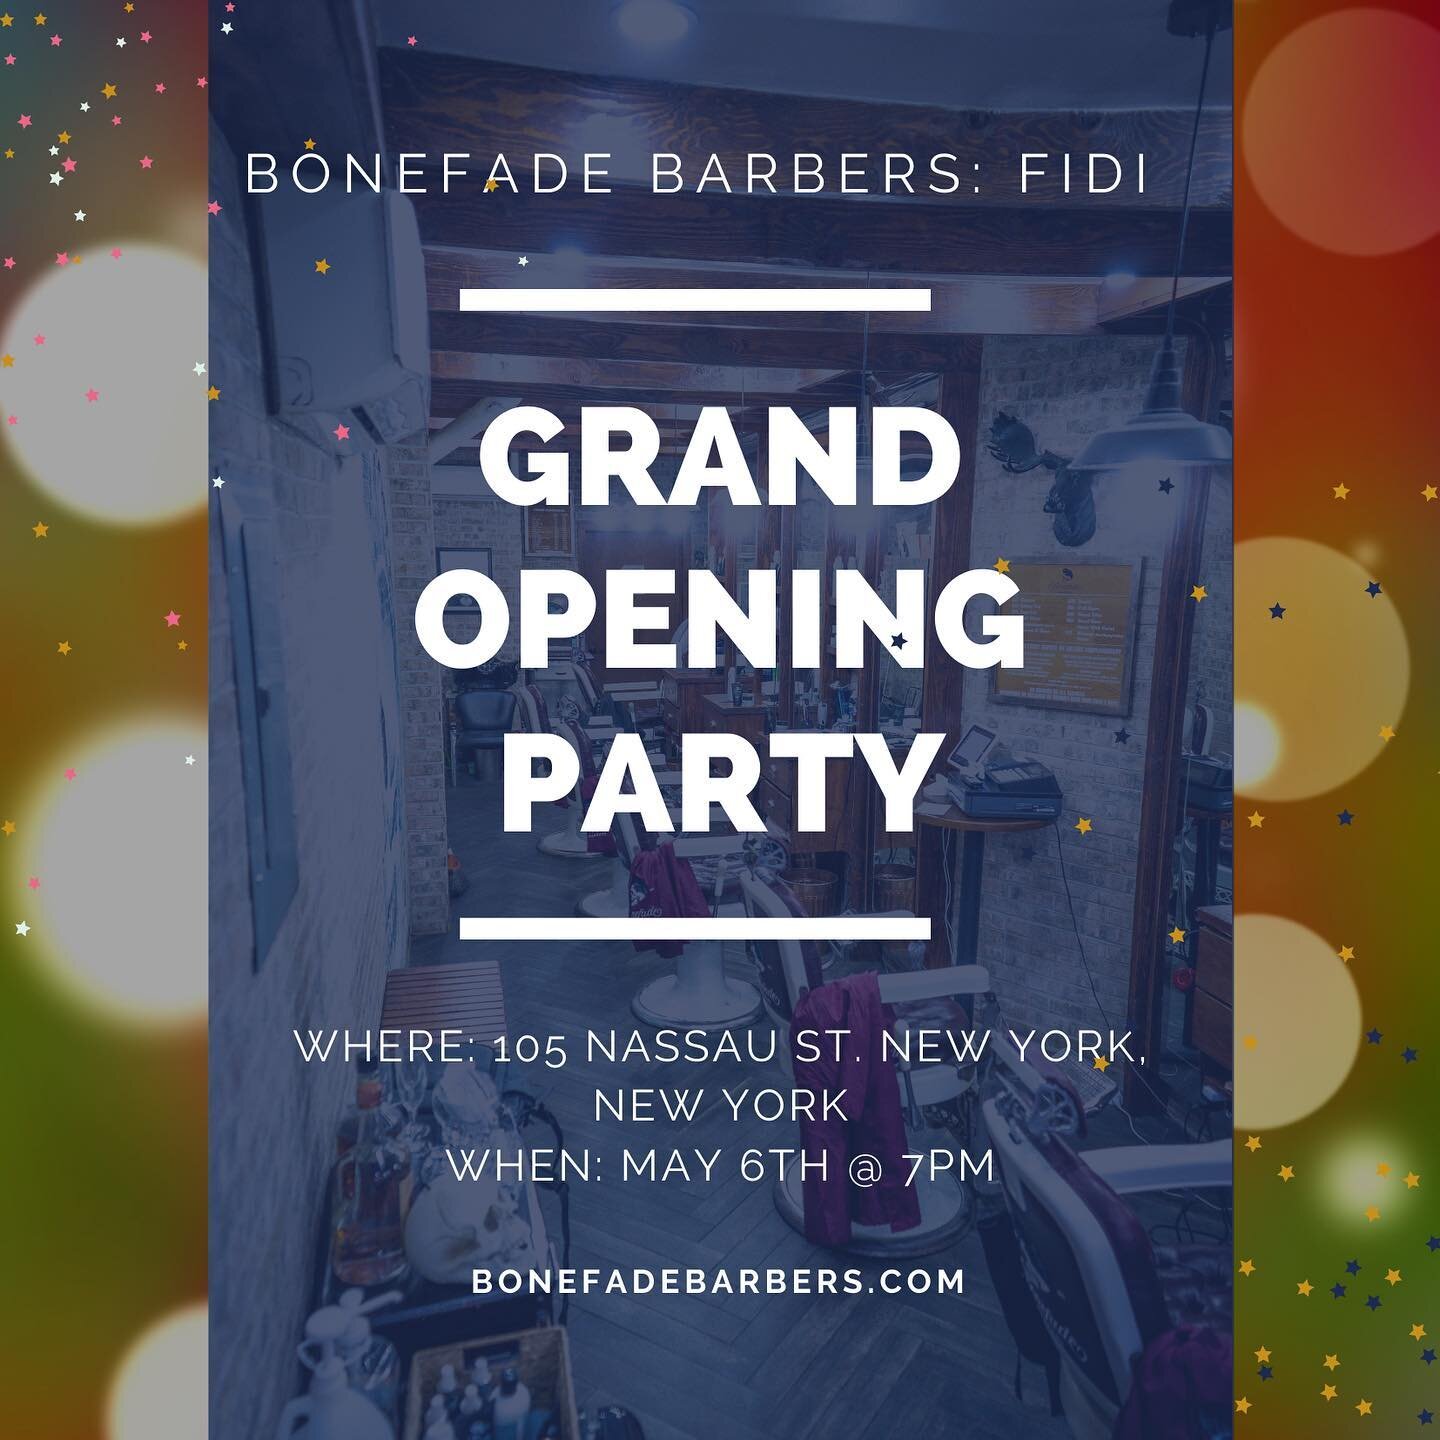 TODAY IS THE DAY! Share this on your story and tag us for a chance to win a free facial with your next haircut 🎉💈

SEE YOU TONIGHT 🎊